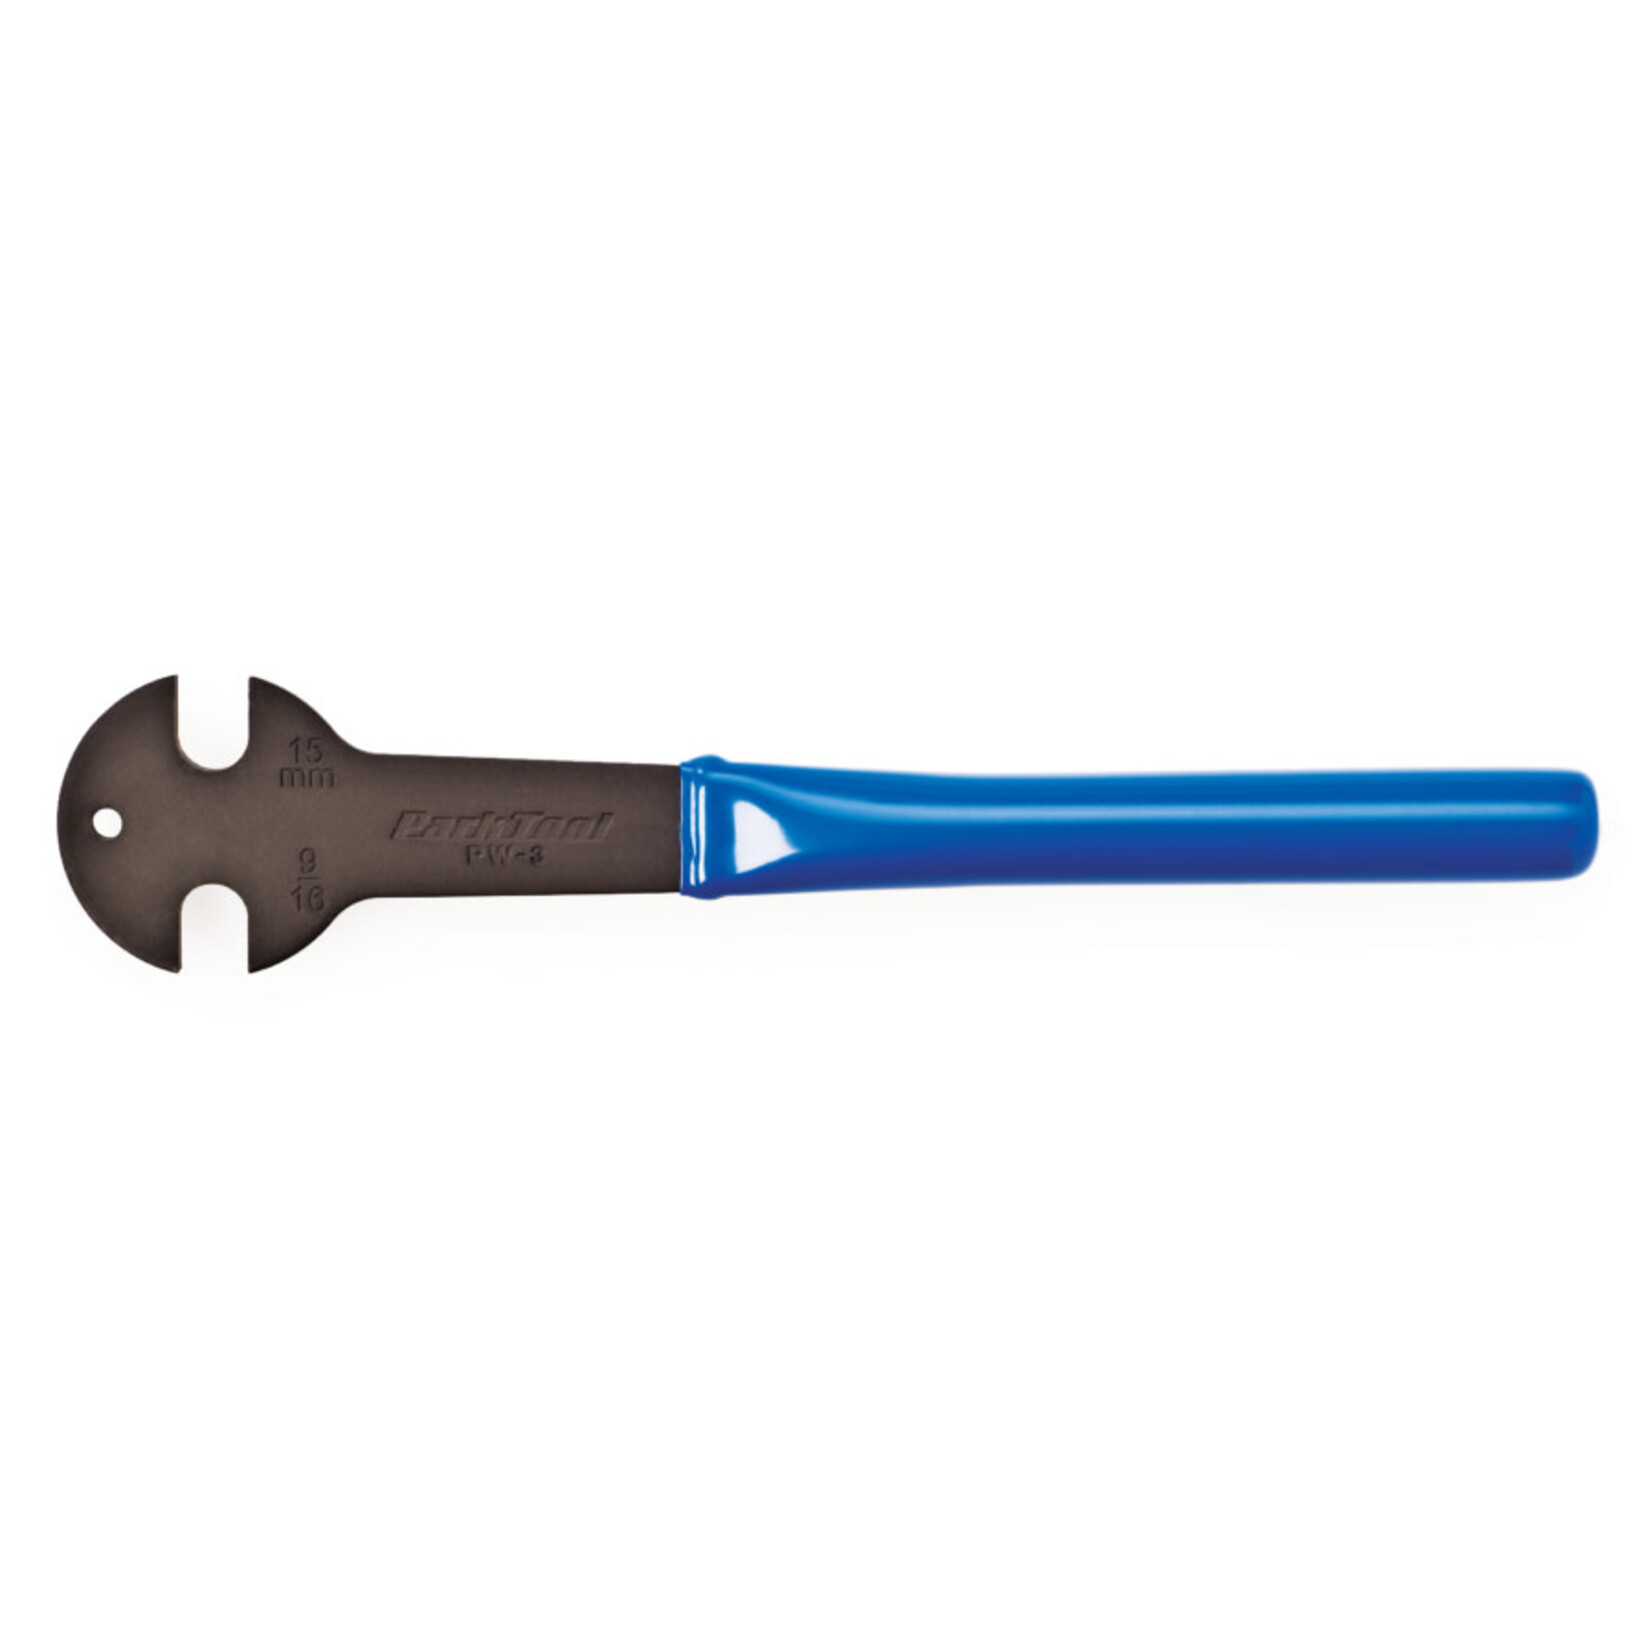 Park Tool Park Tool, PW-3 Pedal Wrench